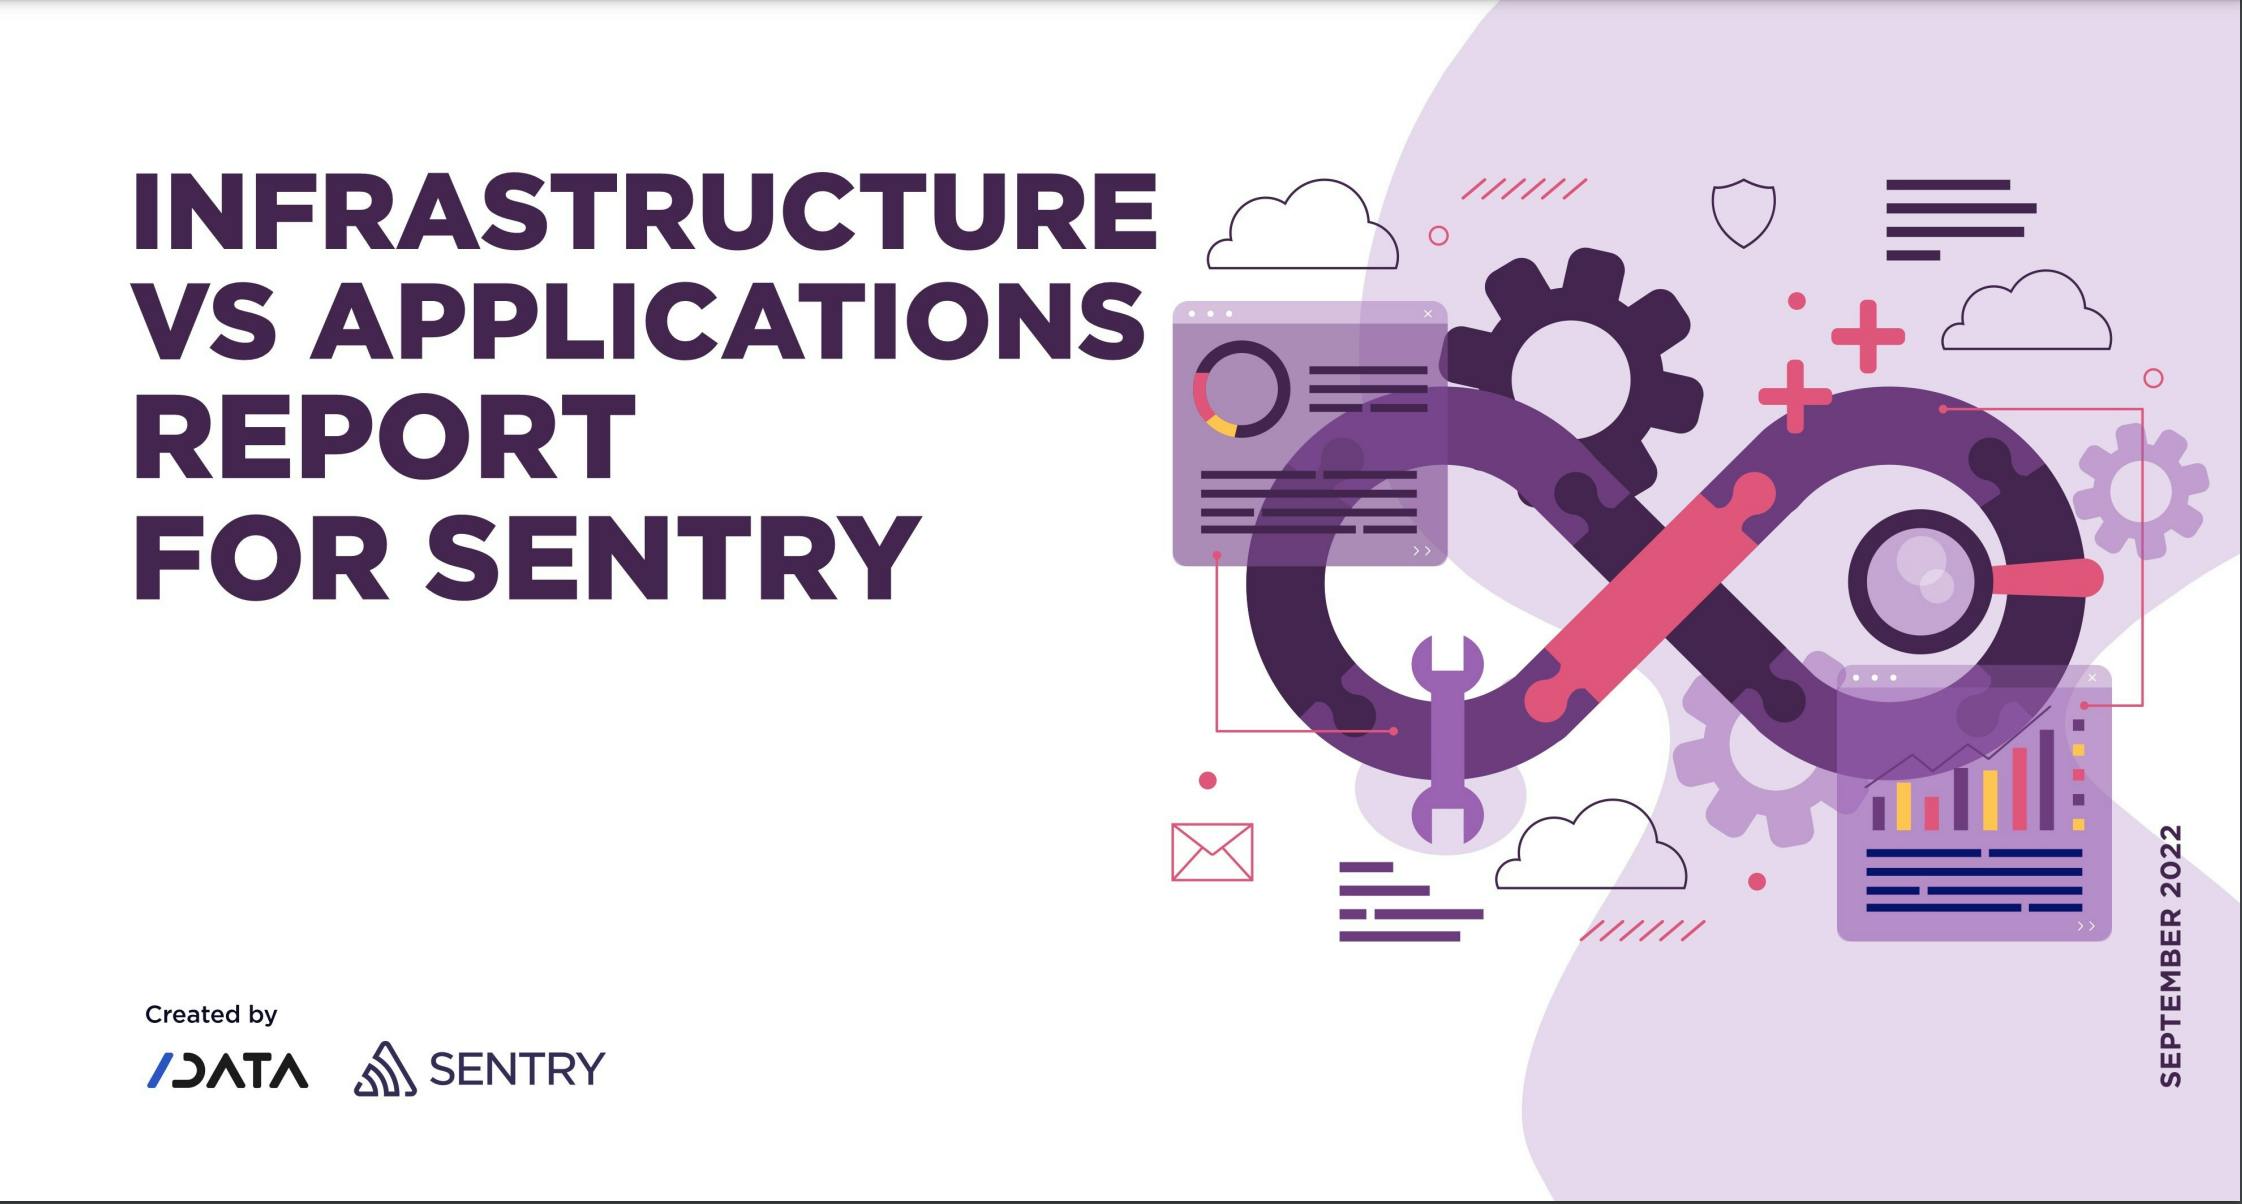 Infrastructure vs Applications Report for Sentry